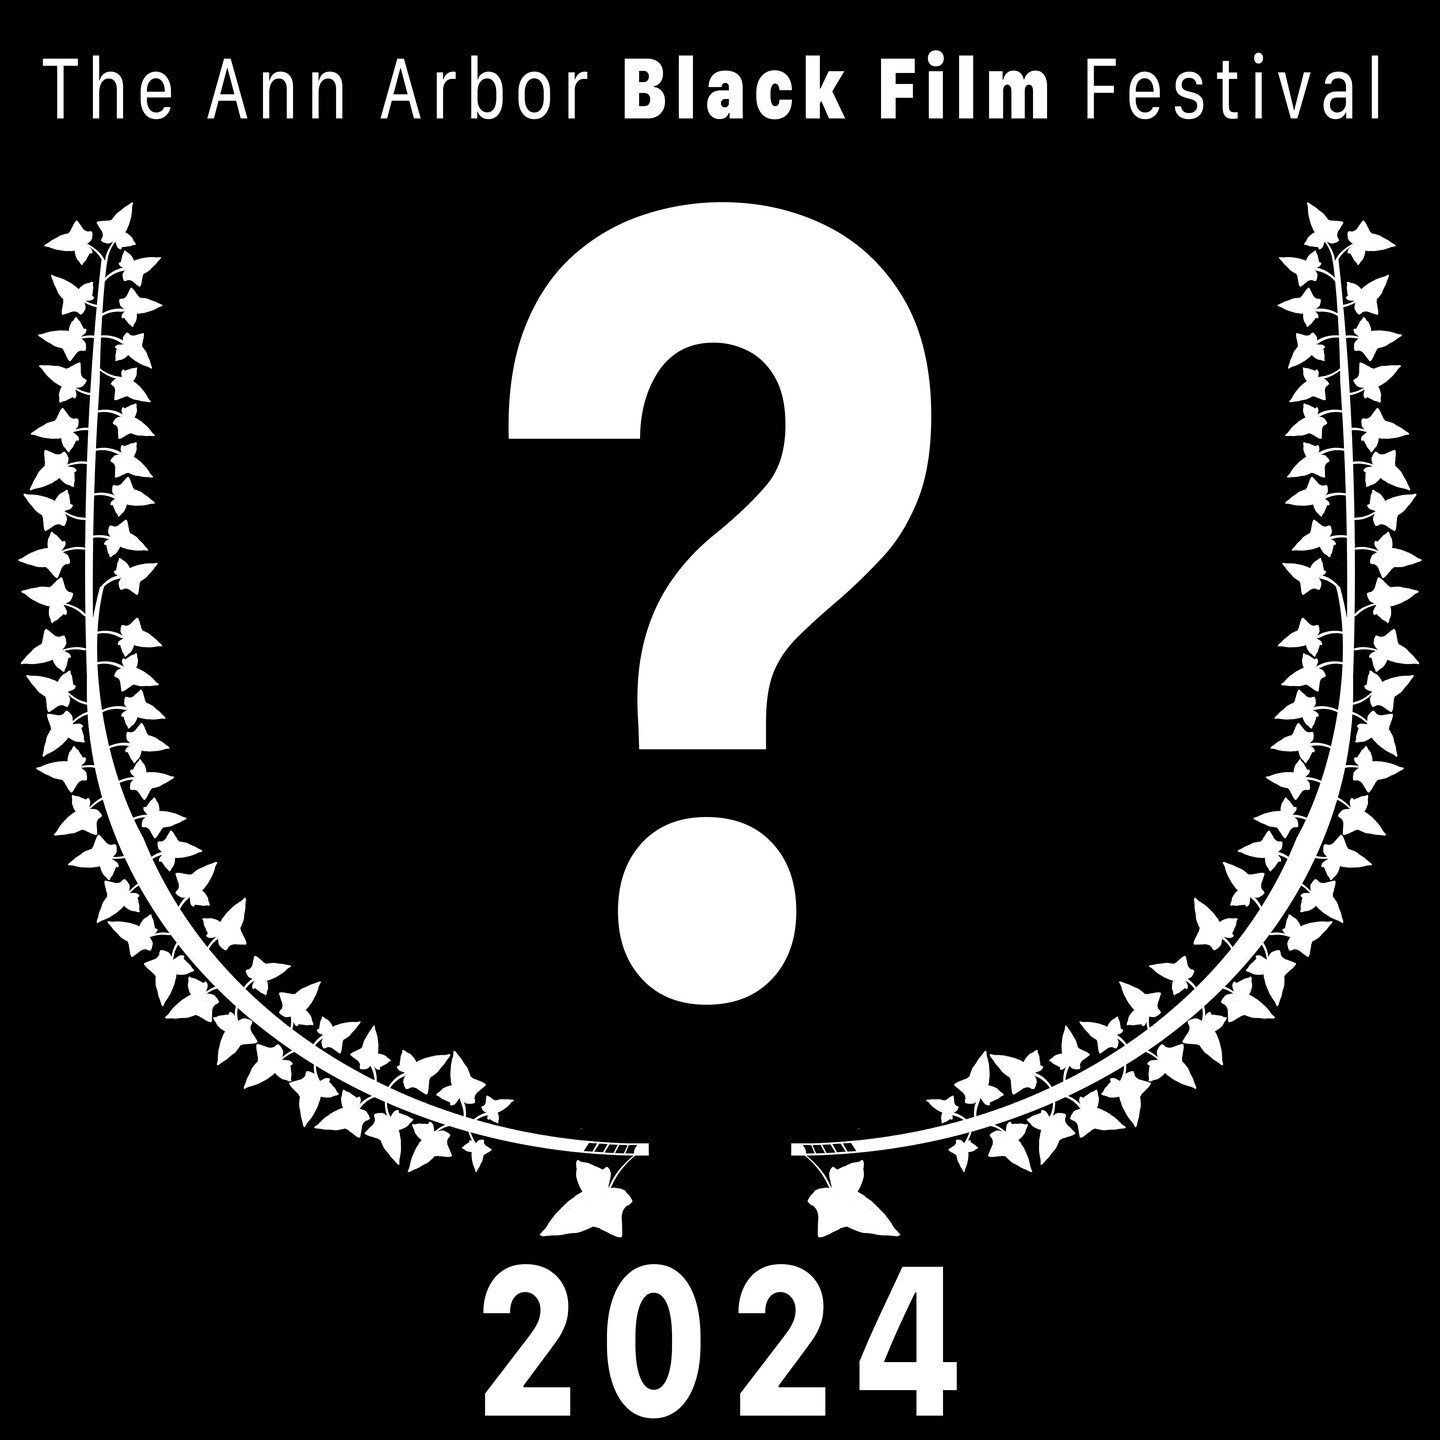 It&rsquo;s Notification Day!

Your films are TOO GOOD!

We are working hard to pick the best lineup for our show on June 1st!

Stay tuned:

We will have our decision by Midnight PST.

(Yep, California time.)

#AnnArbor 
#a2bff